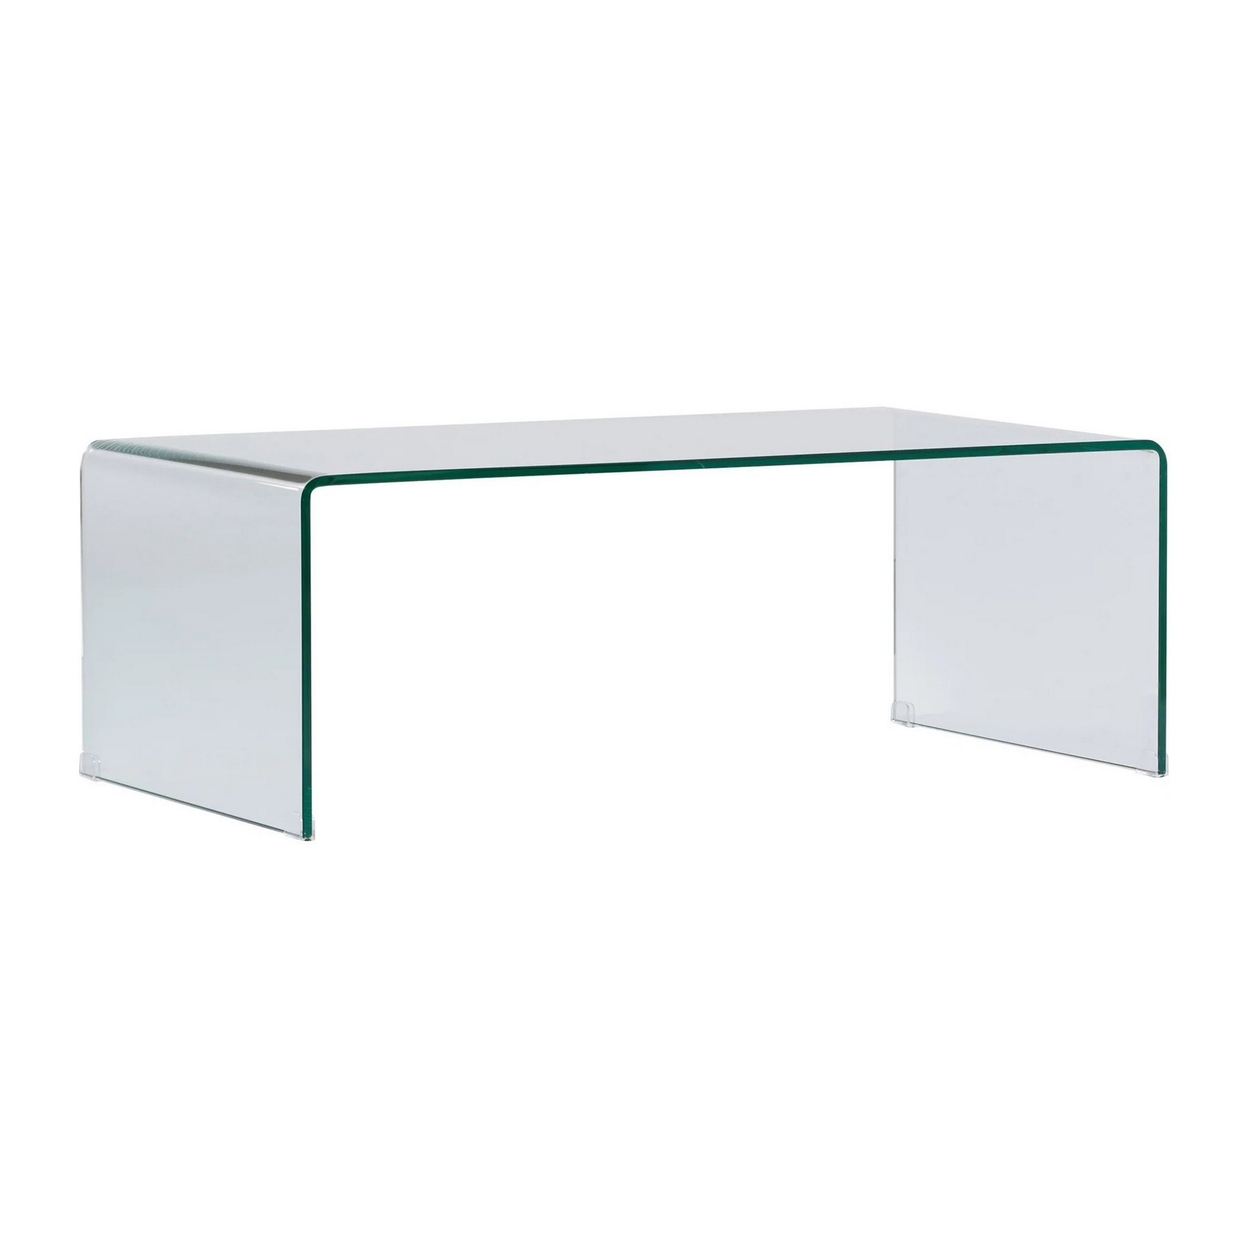 Darb 43 Inch Coffee Table, Clear Tempered Glass Tabletop, Curved Edges - Saltoro Sherpi